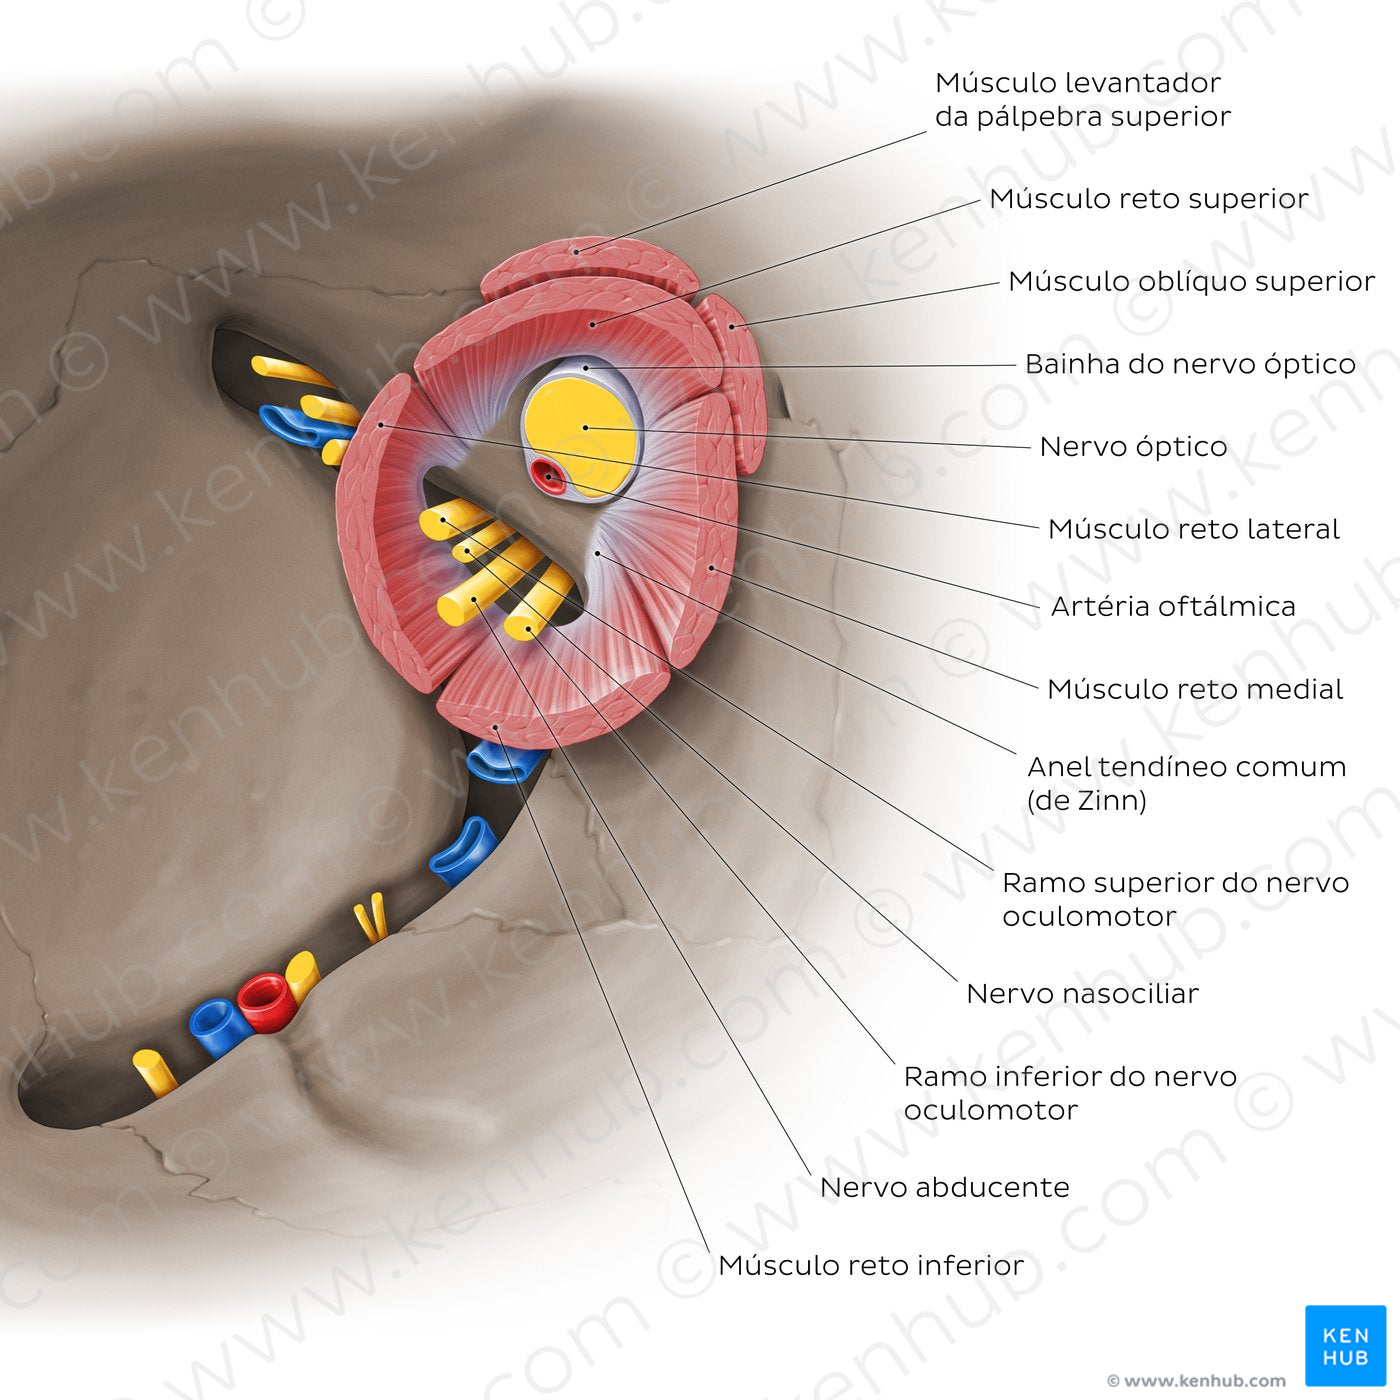 Common tendinous ring: Structure and neurovasculature (Portuguese)